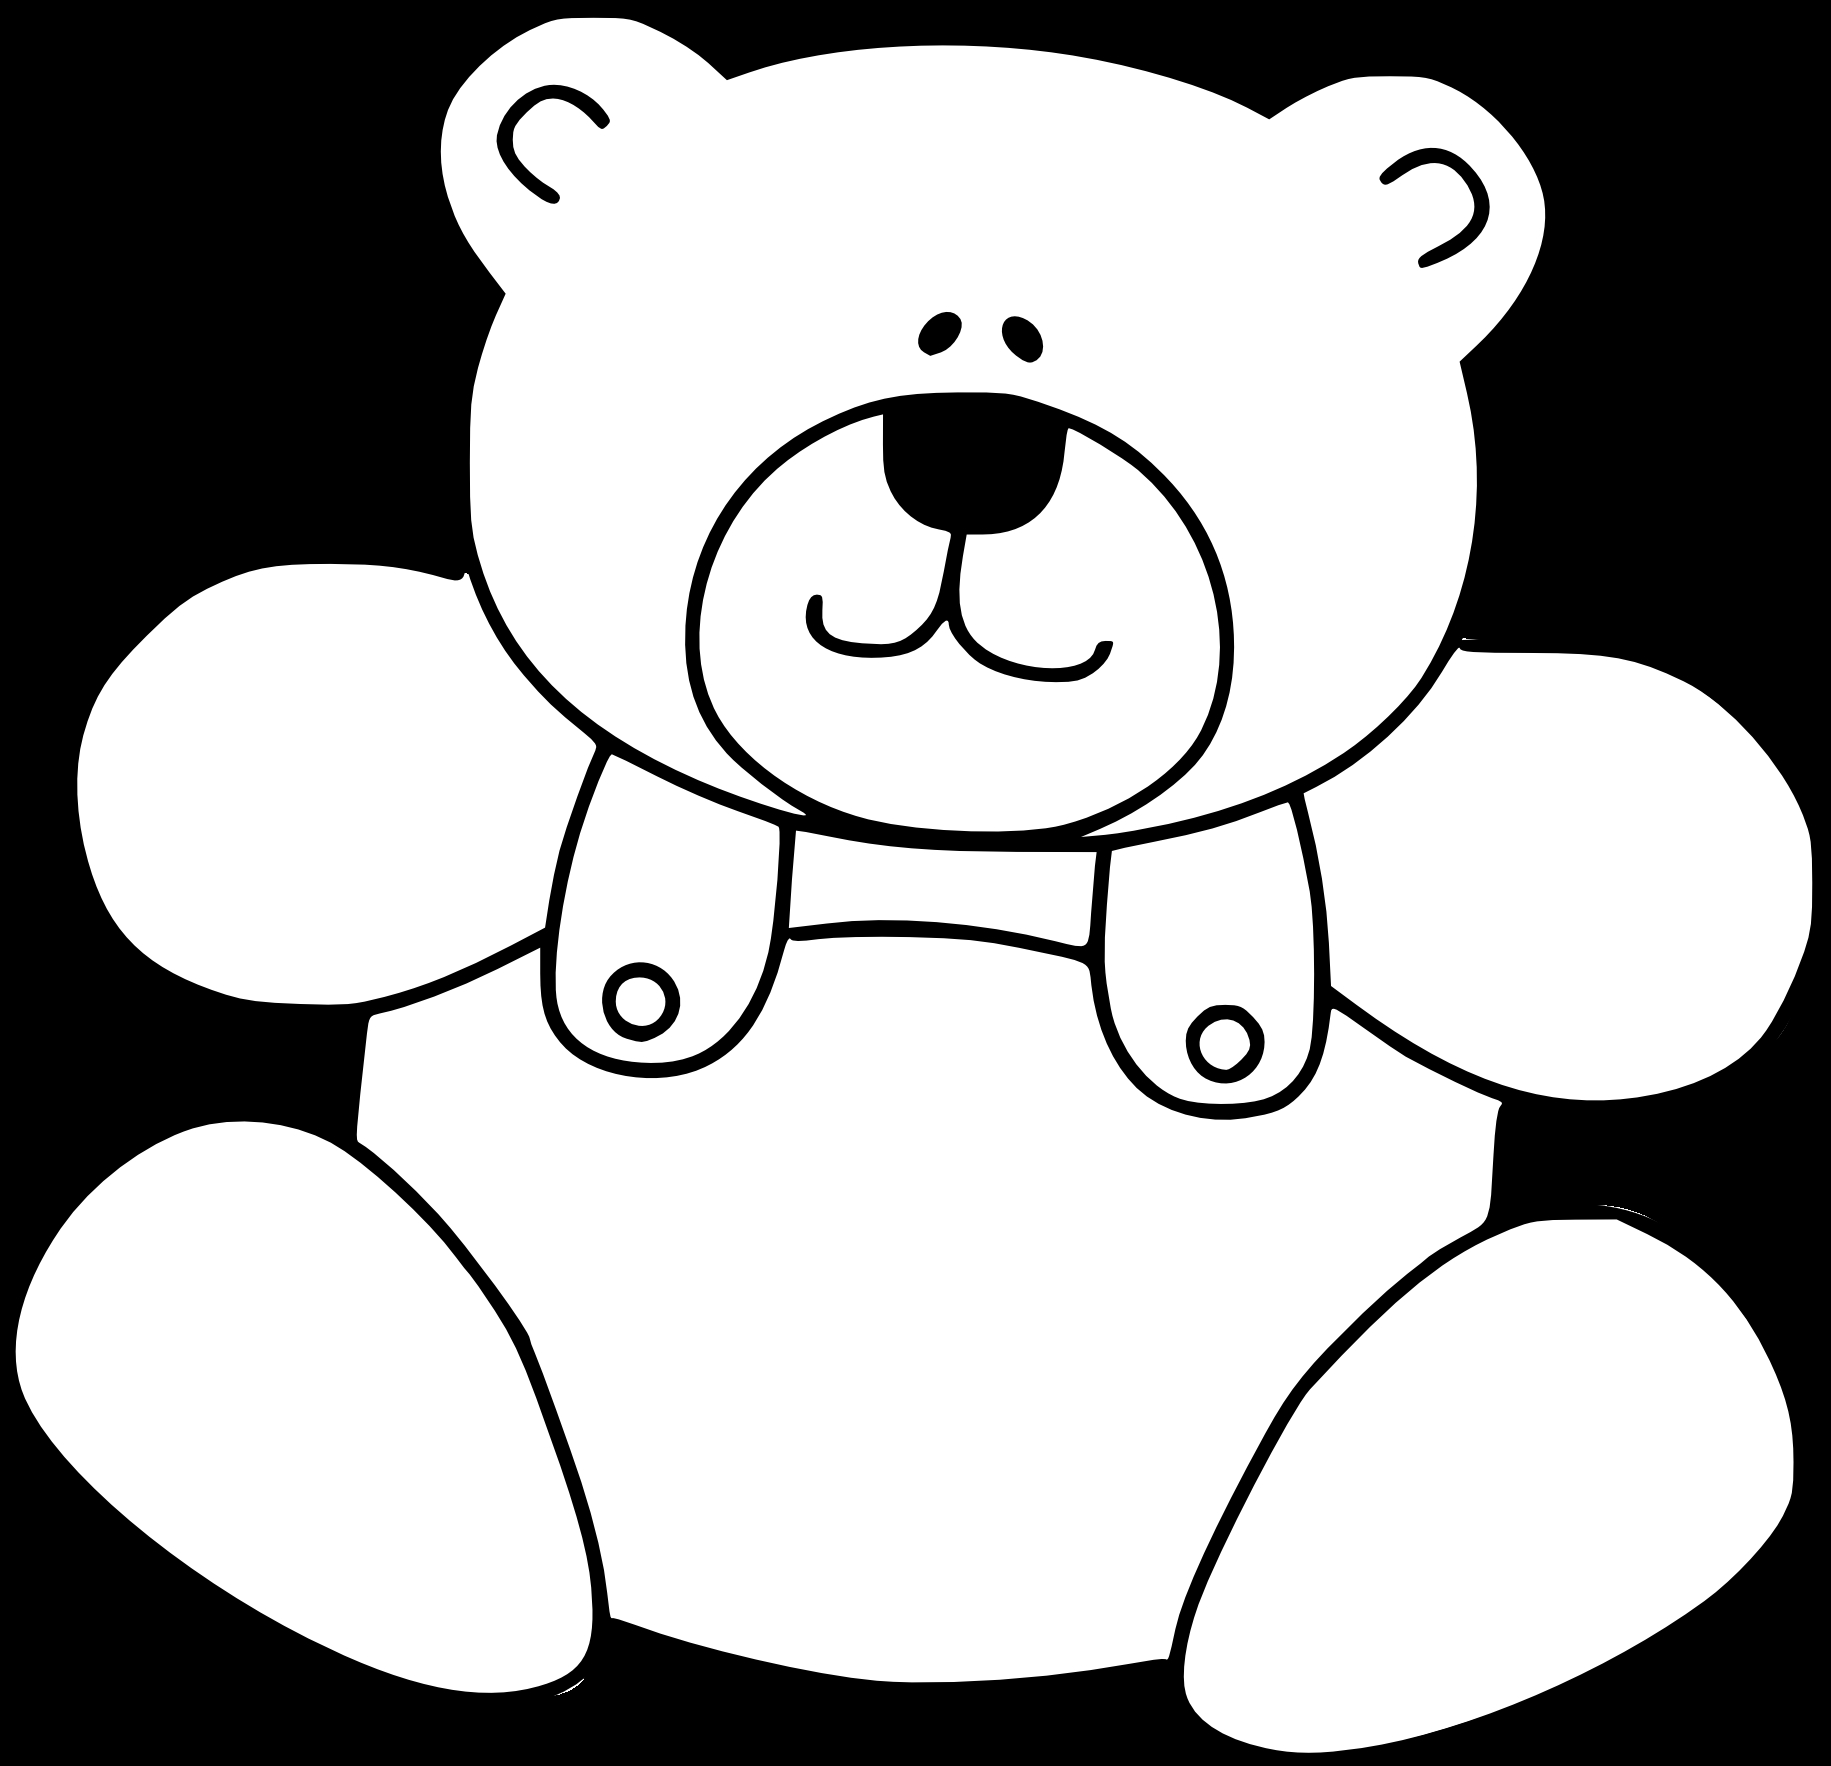 Relaxed teddy bear coloring book